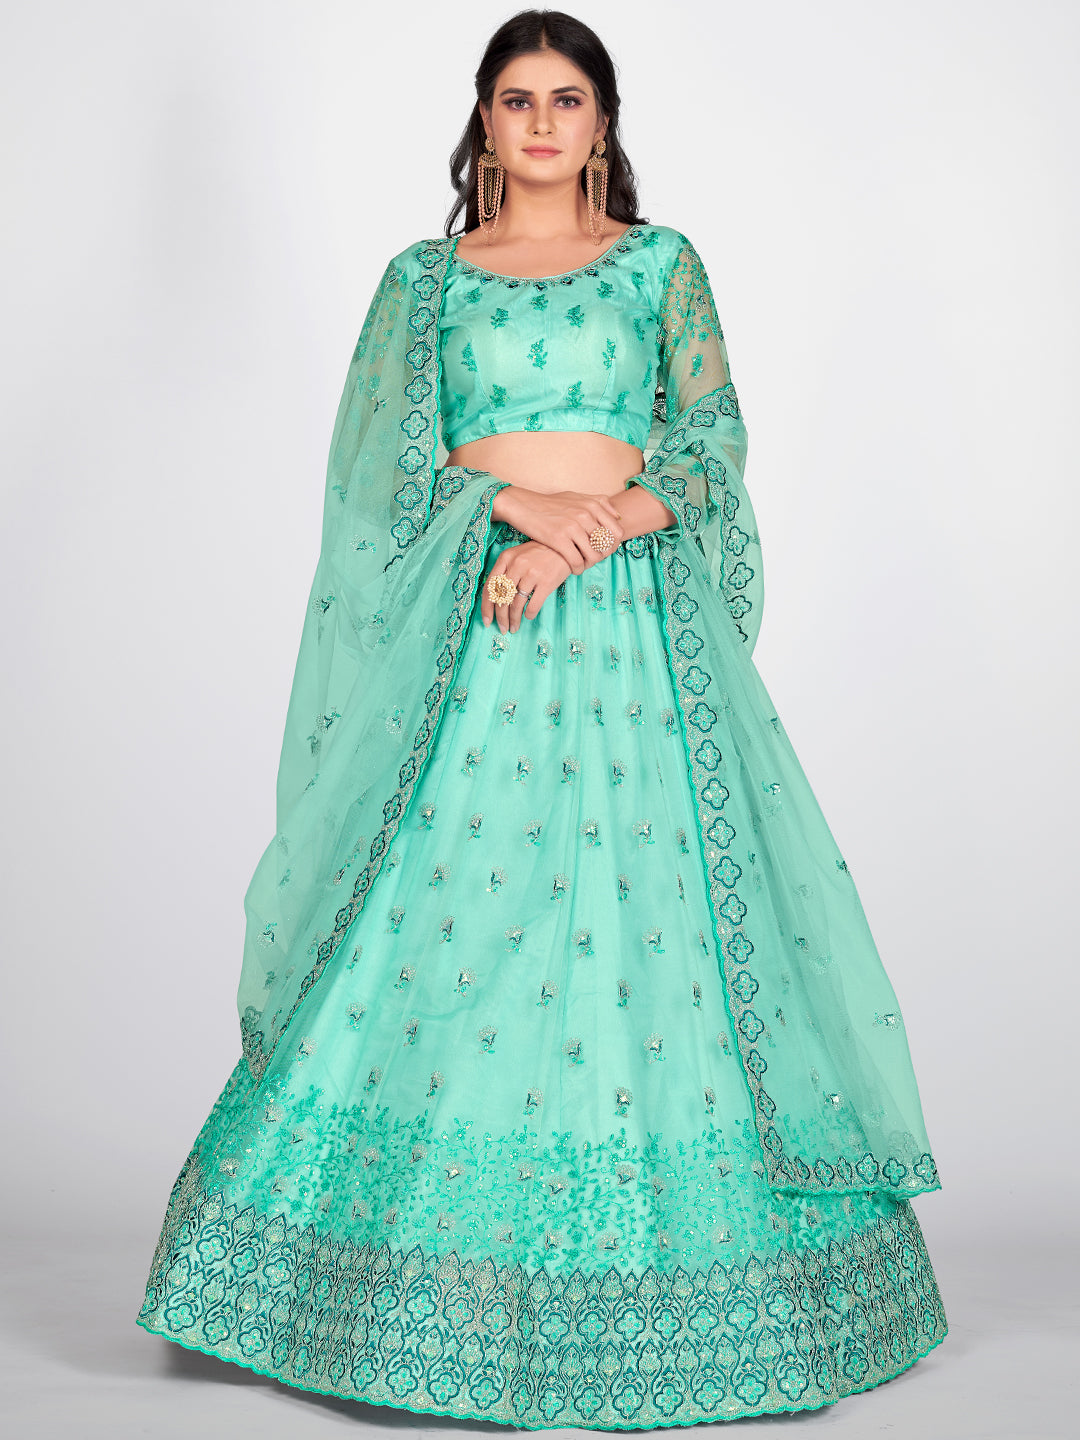 Most Famous Turquoise Blue and Green Embroidered Sangeet Special Lehenga and Blouse With Dupatta